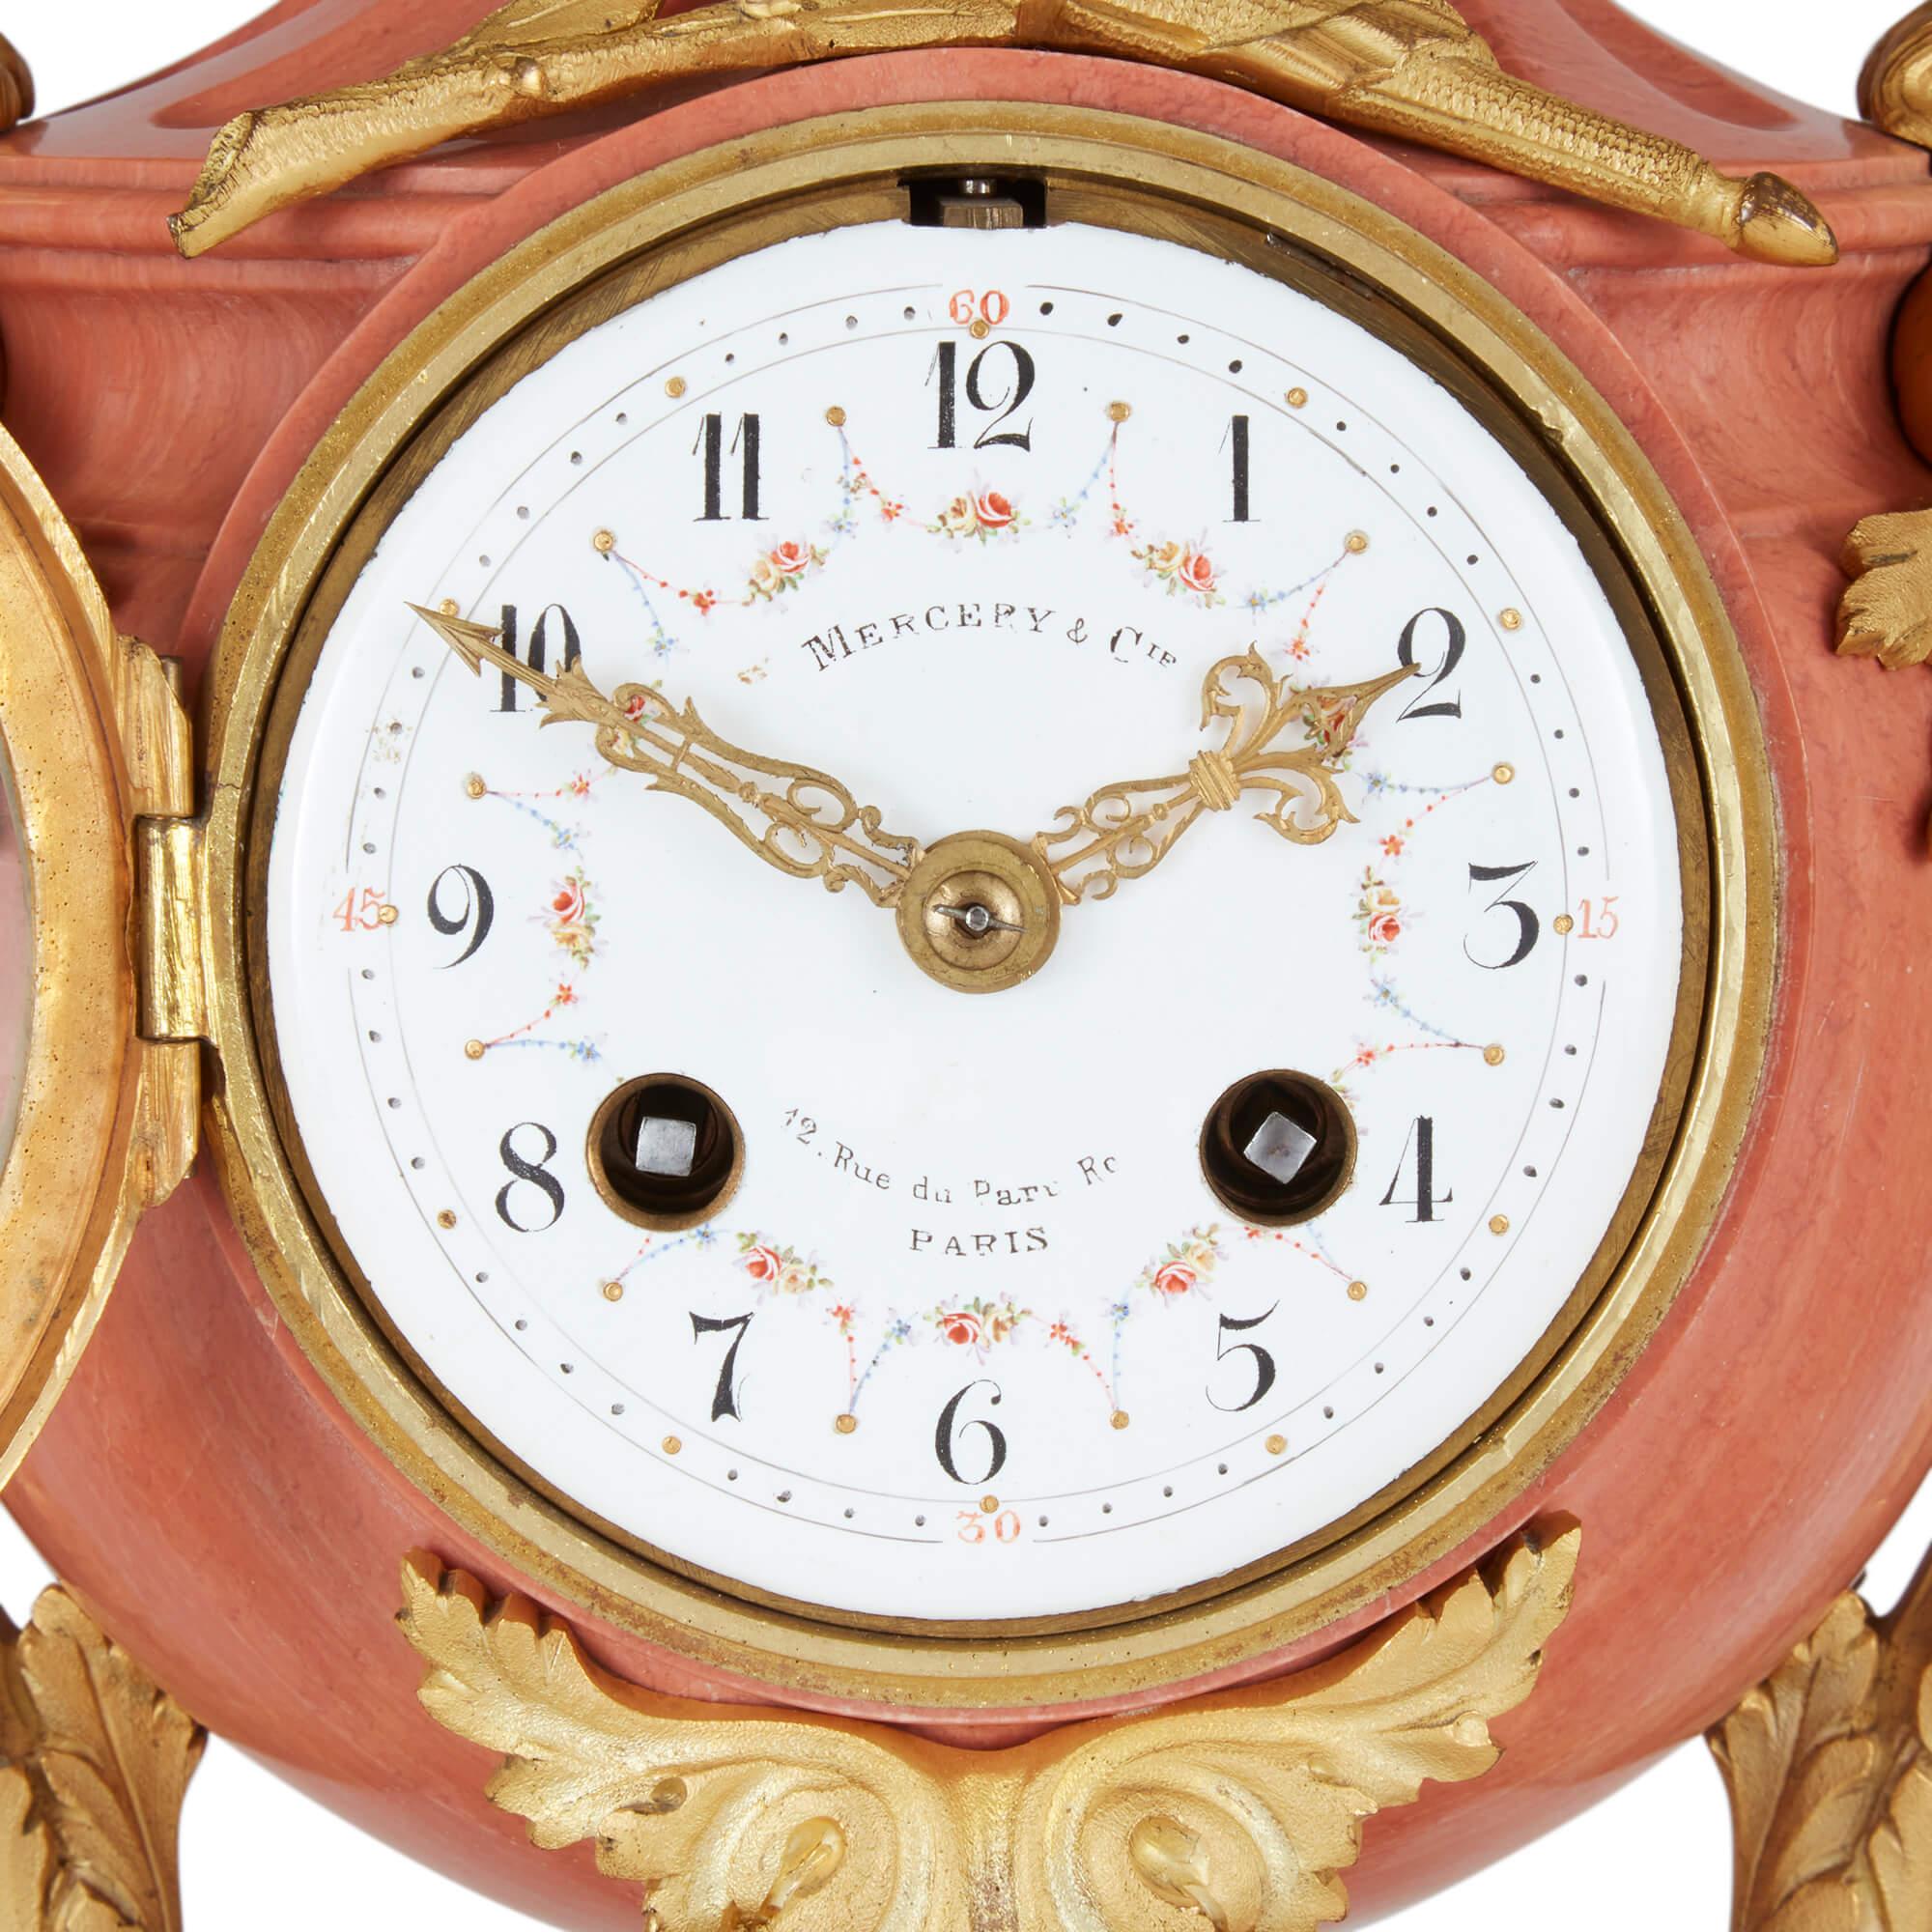 19th Century French pink marble and ormolu clock set 
French, Late 19th Century 
Clock: Height 46cm, width 23cm, depth 18cm 
Candelabra: Height 44.5cm, width 22cm, depth 20cm

This unusual three-piece clock garniture combines stunning pink marble